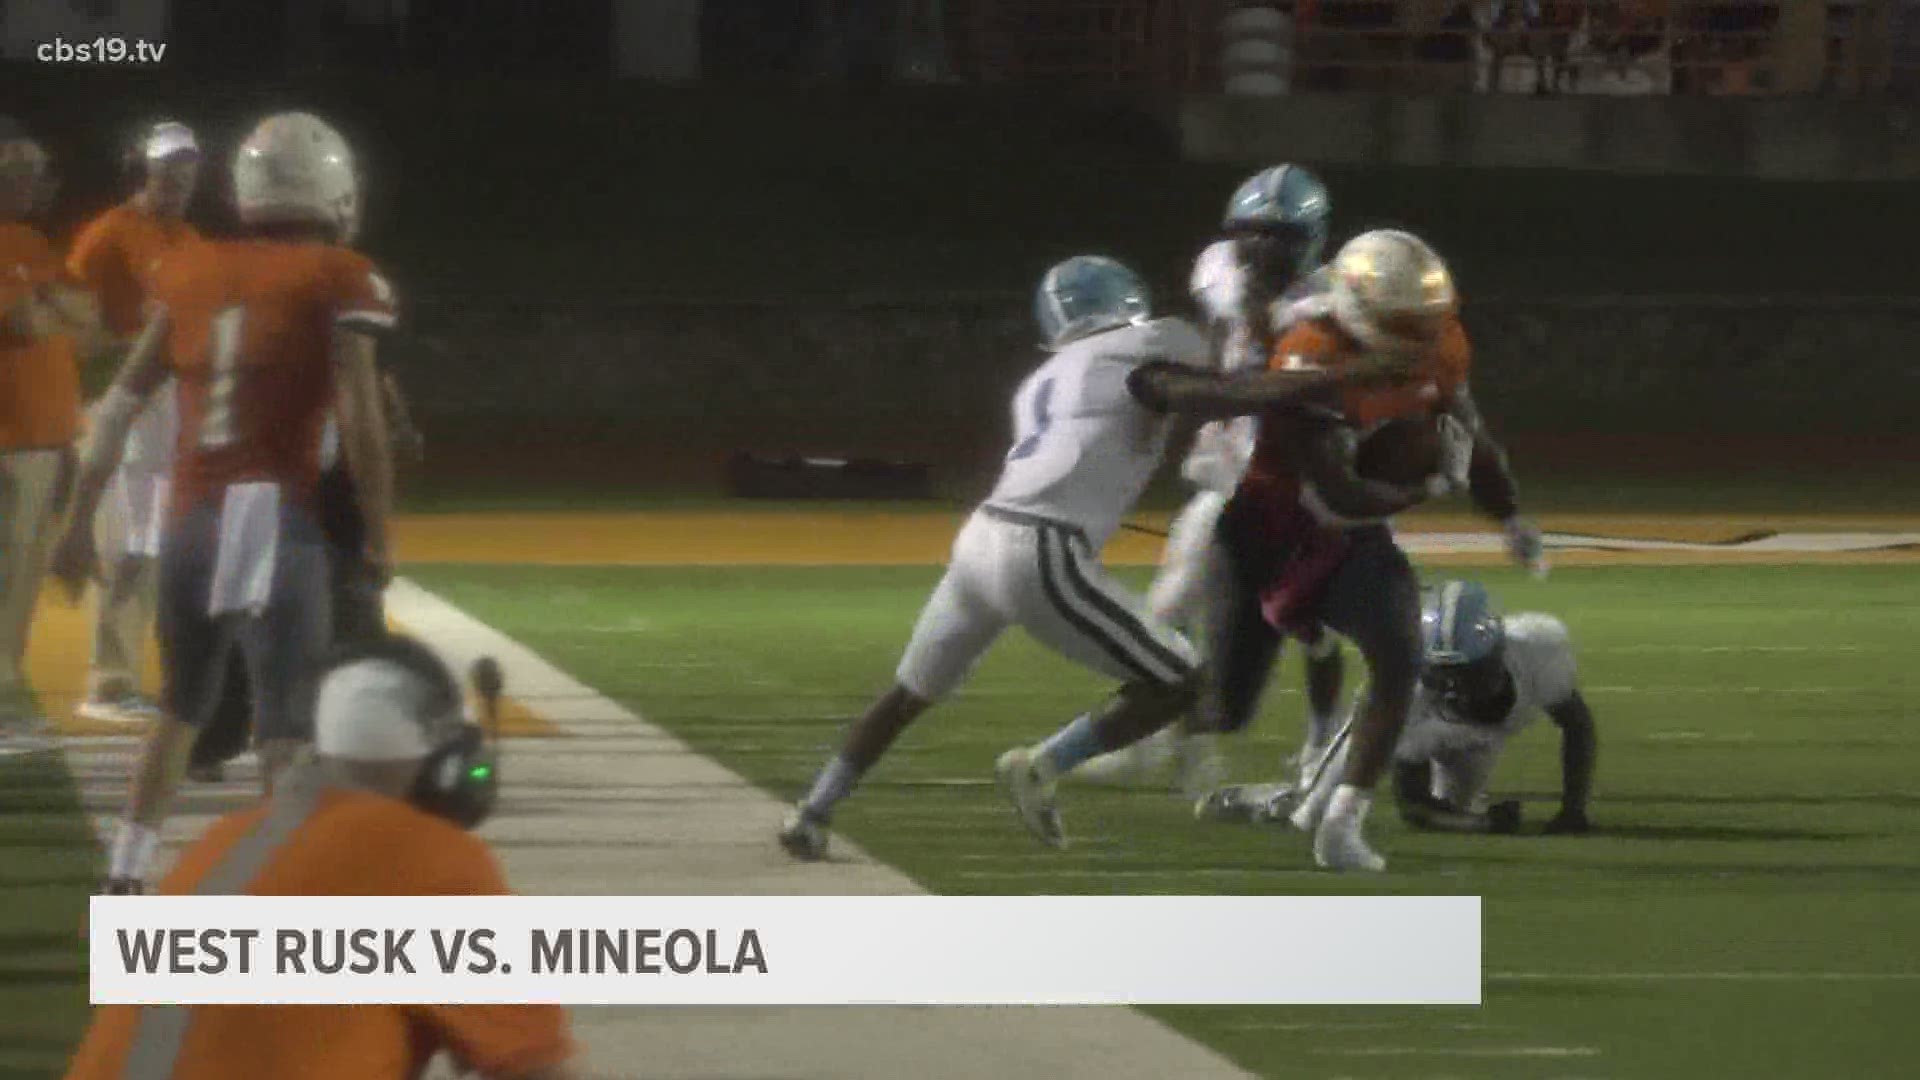 Mineola defeated West Rusk by a score of 36-14.